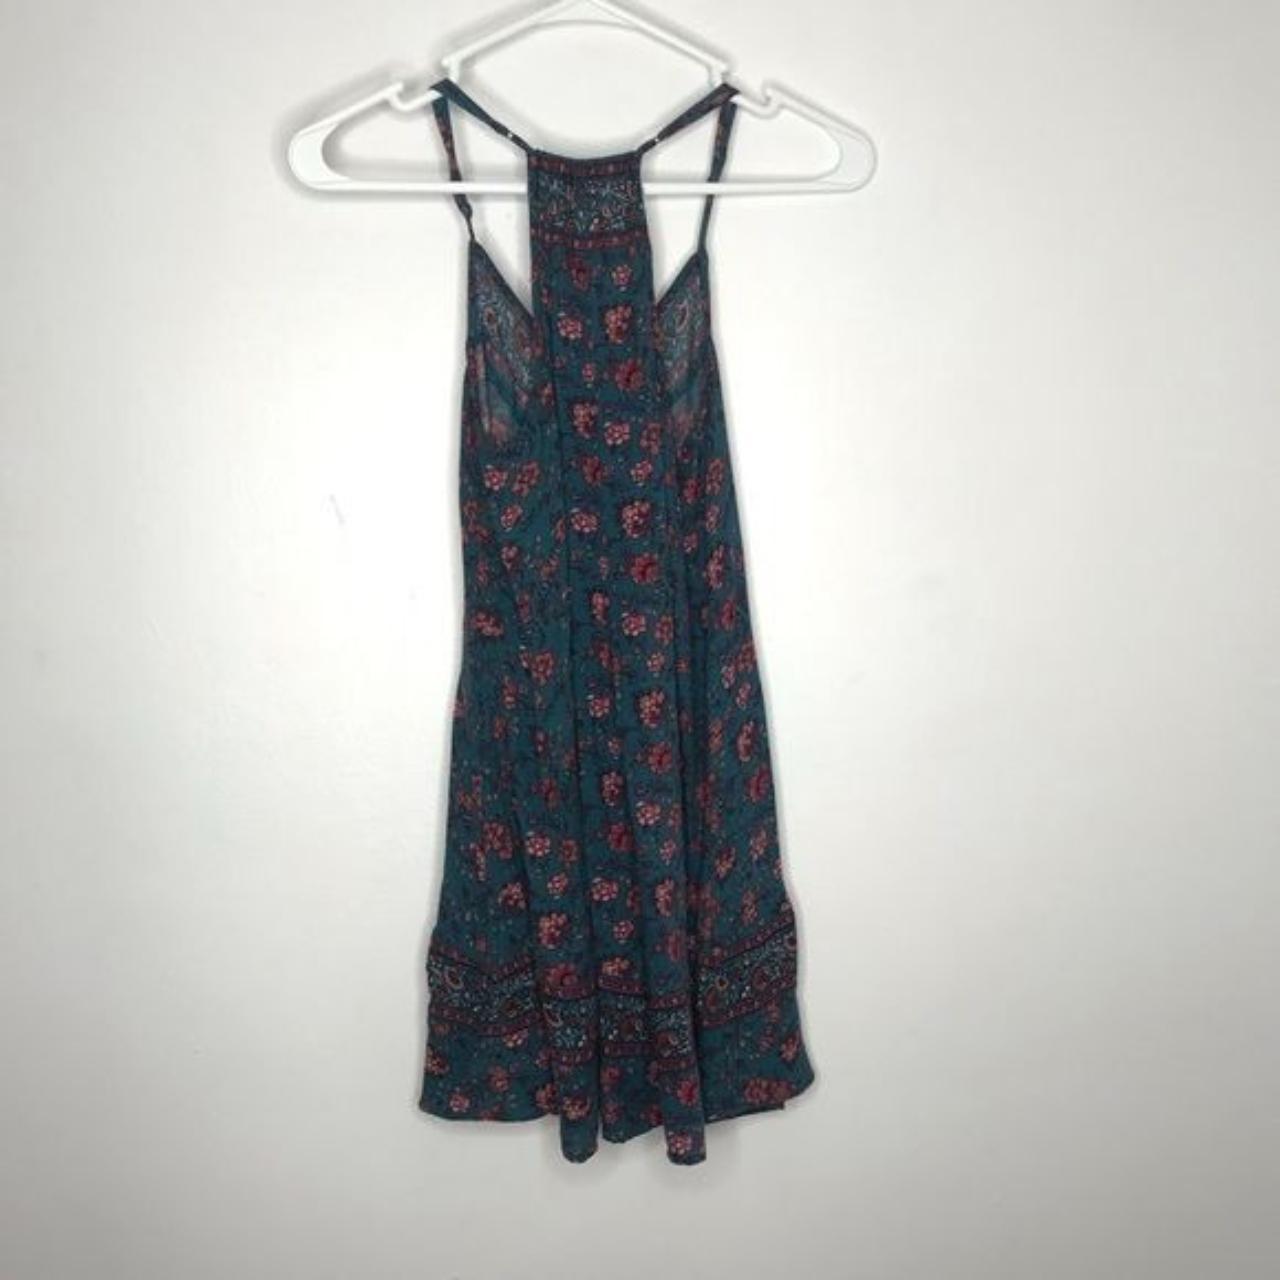 Product Image 2 - American Eagle Floral Shift Dress
Size